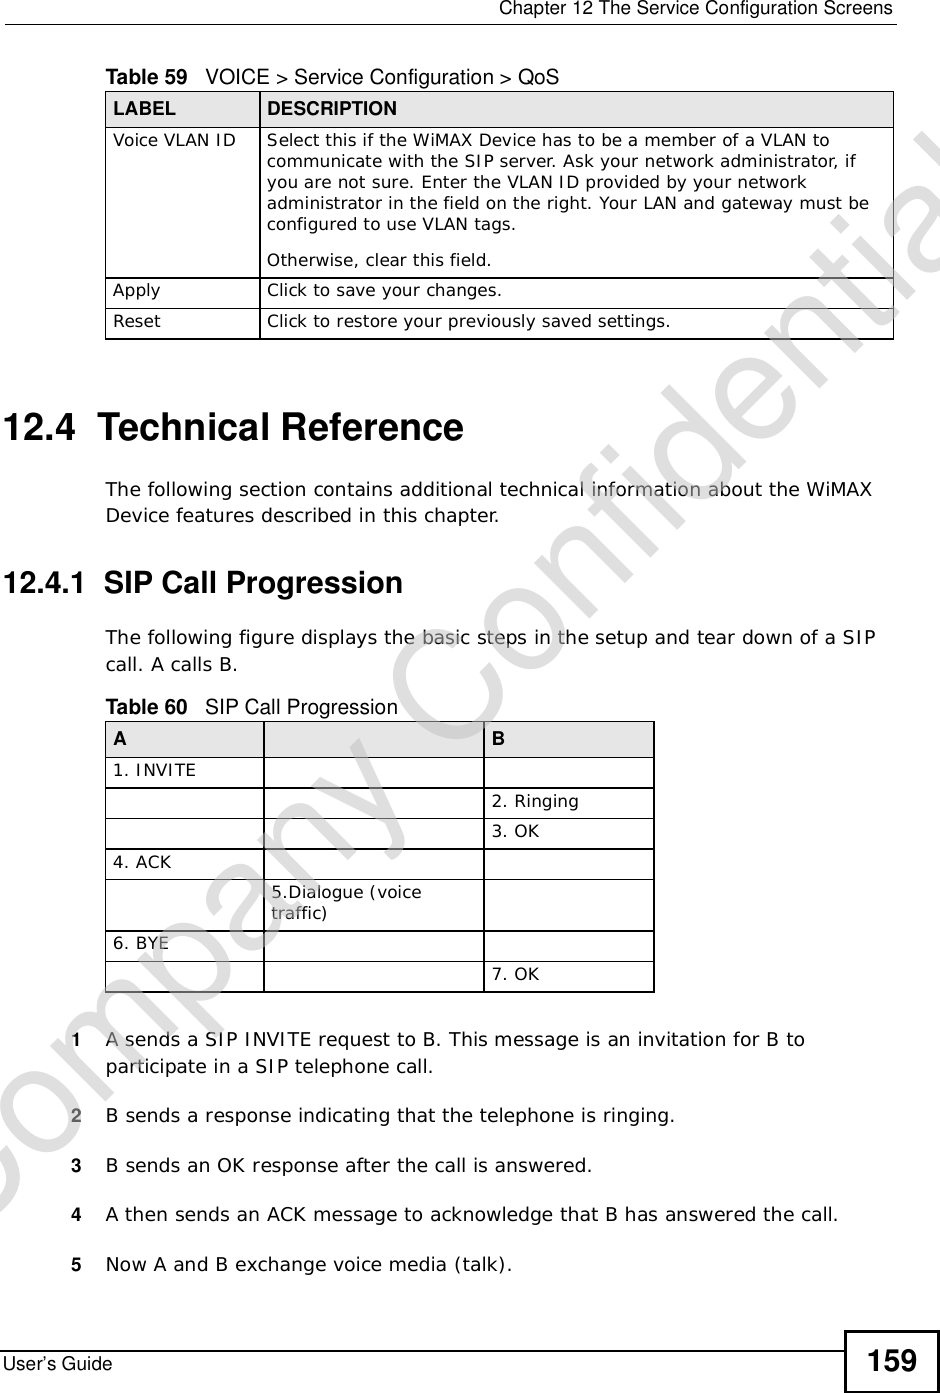  Chapter 12The Service Configuration ScreensUser’s Guide 15912.4  Technical ReferenceThe following section contains additional technical information about the WiMAX Device features described in this chapter.12.4.1  SIP Call ProgressionThe following figure displays the basic steps in the setup and tear down of a SIP call. A calls B. 1A sends a SIP INVITE request to B. This message is an invitation for B to participate in a SIP telephone call. 2B sends a response indicating that the telephone is ringing.3B sends an OK response after the call is answered. 4A then sends an ACK message to acknowledge that B has answered the call. 5Now A and B exchange voice media (talk). Voice VLAN IDSelect this if the WiMAX Device has to be a member of a VLAN to communicate with the SIP server. Ask your network administrator, if you are not sure. Enter the VLAN ID provided by your network administrator in the field on the right. Your LAN and gateway must be configured to use VLAN tags.Otherwise, clear this field.Apply Click to save your changes.Reset Click to restore your previously saved settings.Table 59   VOICE &gt; Service Configuration &gt; QoSLABEL DESCRIPTIONTable 60   SIP Call ProgressionA B1. INVITE2. Ringing3. OK4. ACK 5.Dialogue (voice traffic)6. BYE7. OKCompany Confidential